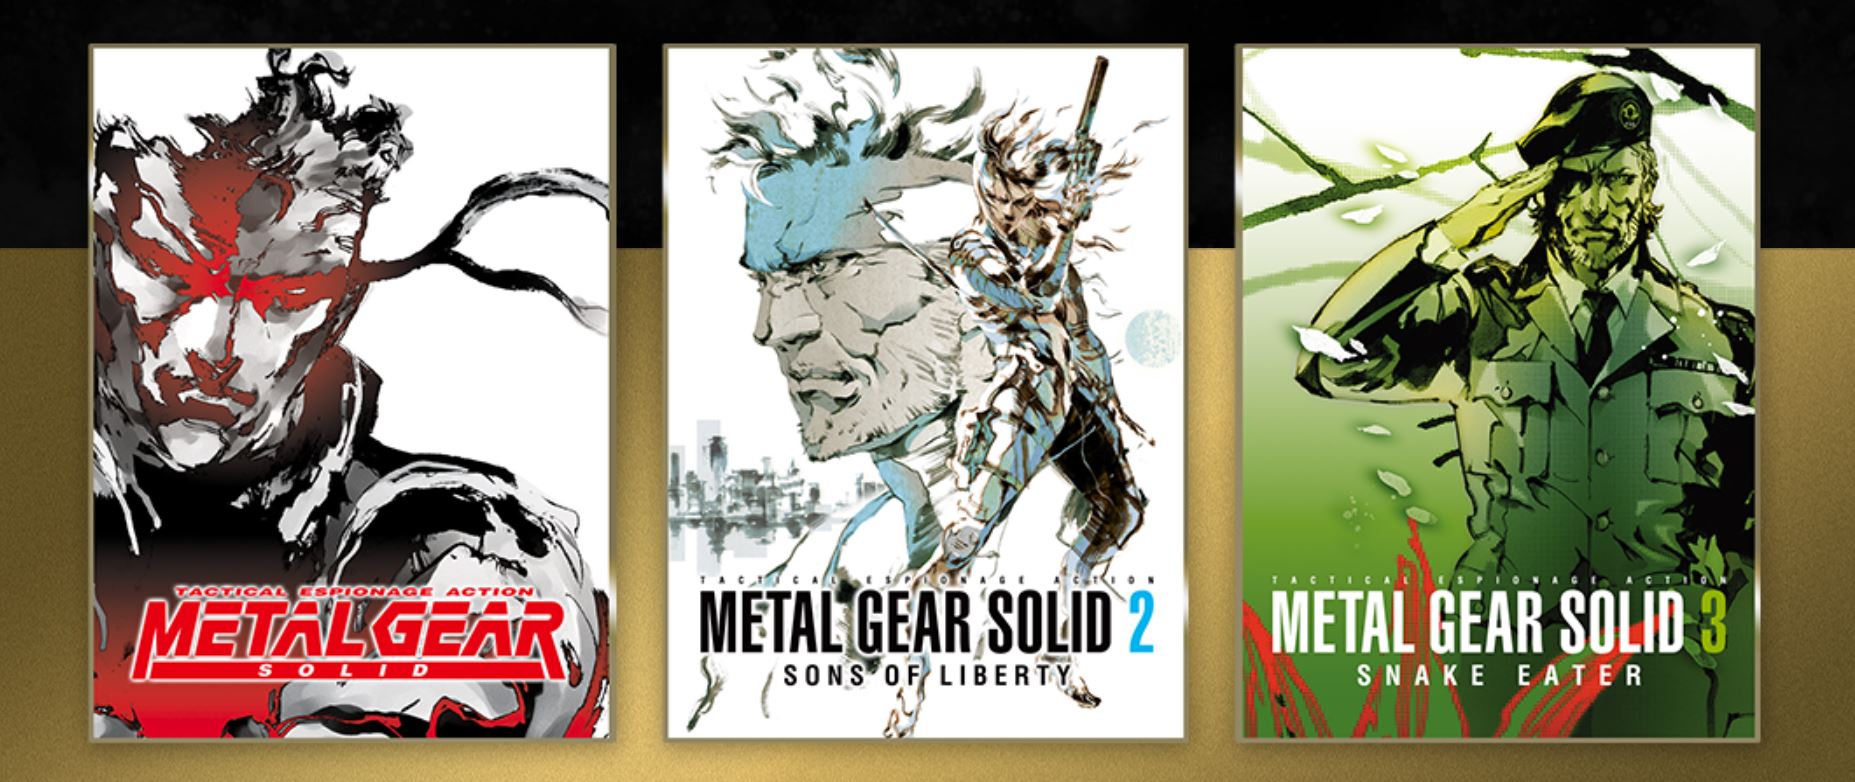 PlayStation Showcase: Spider-Man 2, Metal Gear Solid, more